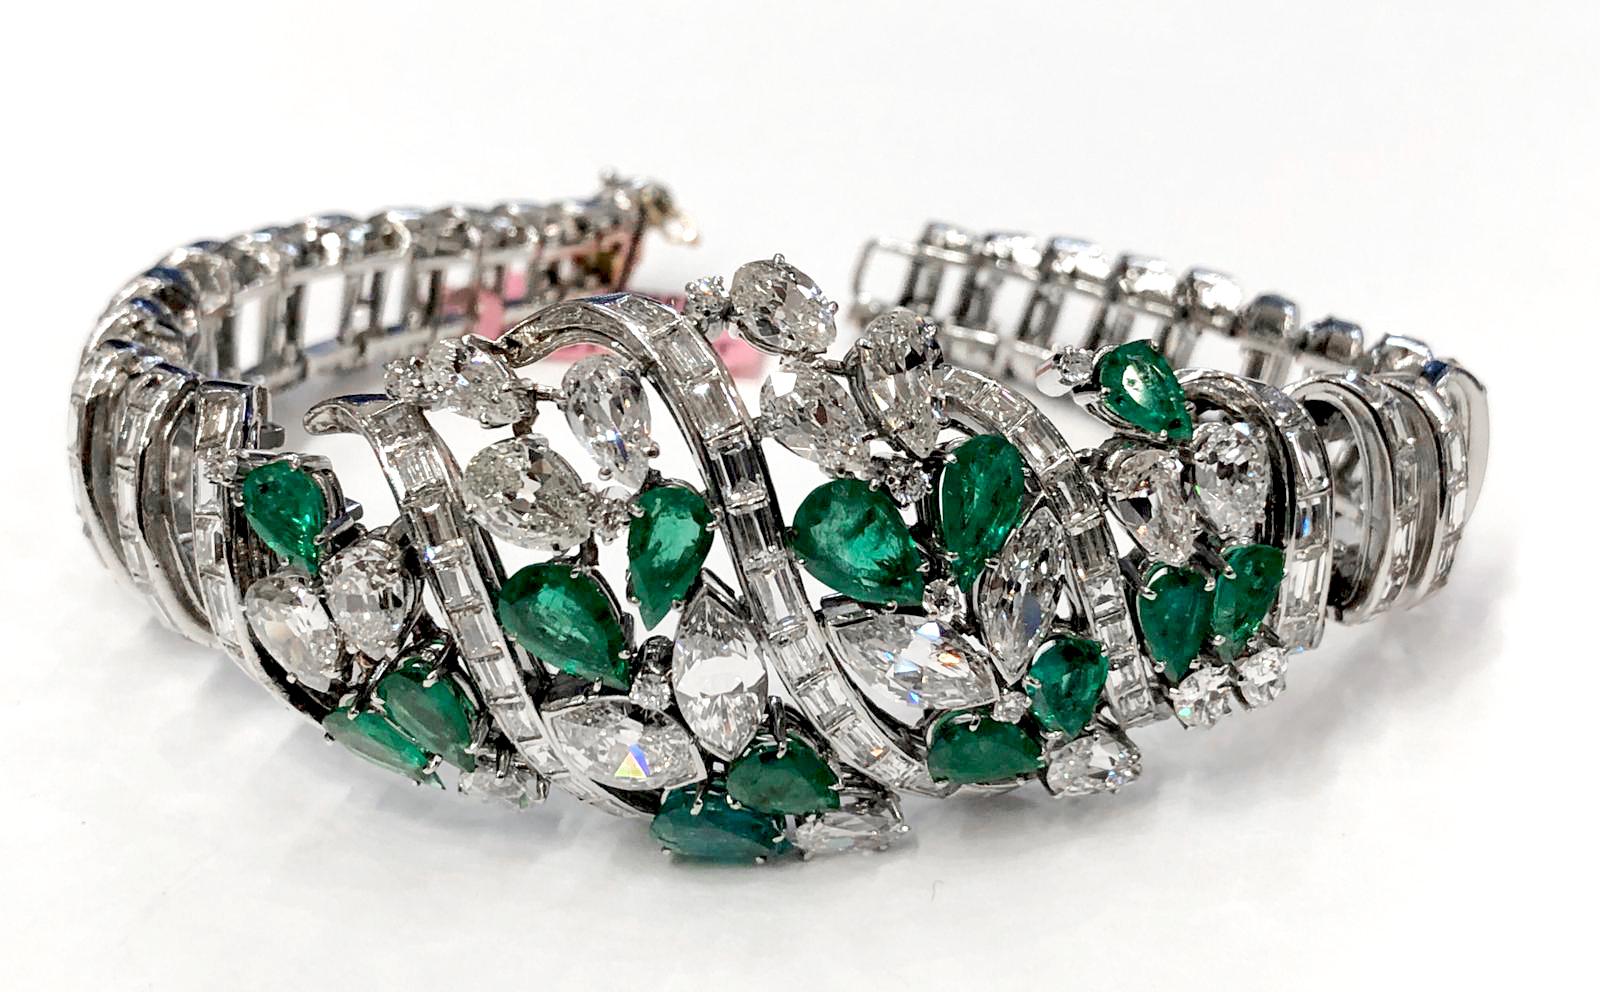 Of openwork design, set with swirling ribbon-like lines of baguette diamonds, the center set with clusters of pear-shaped emeralds, and pear-, marquise-shaped and brilliant-cut diamonds bracelet.
length approx. 180mm.
approx. 18 cts. diamonds